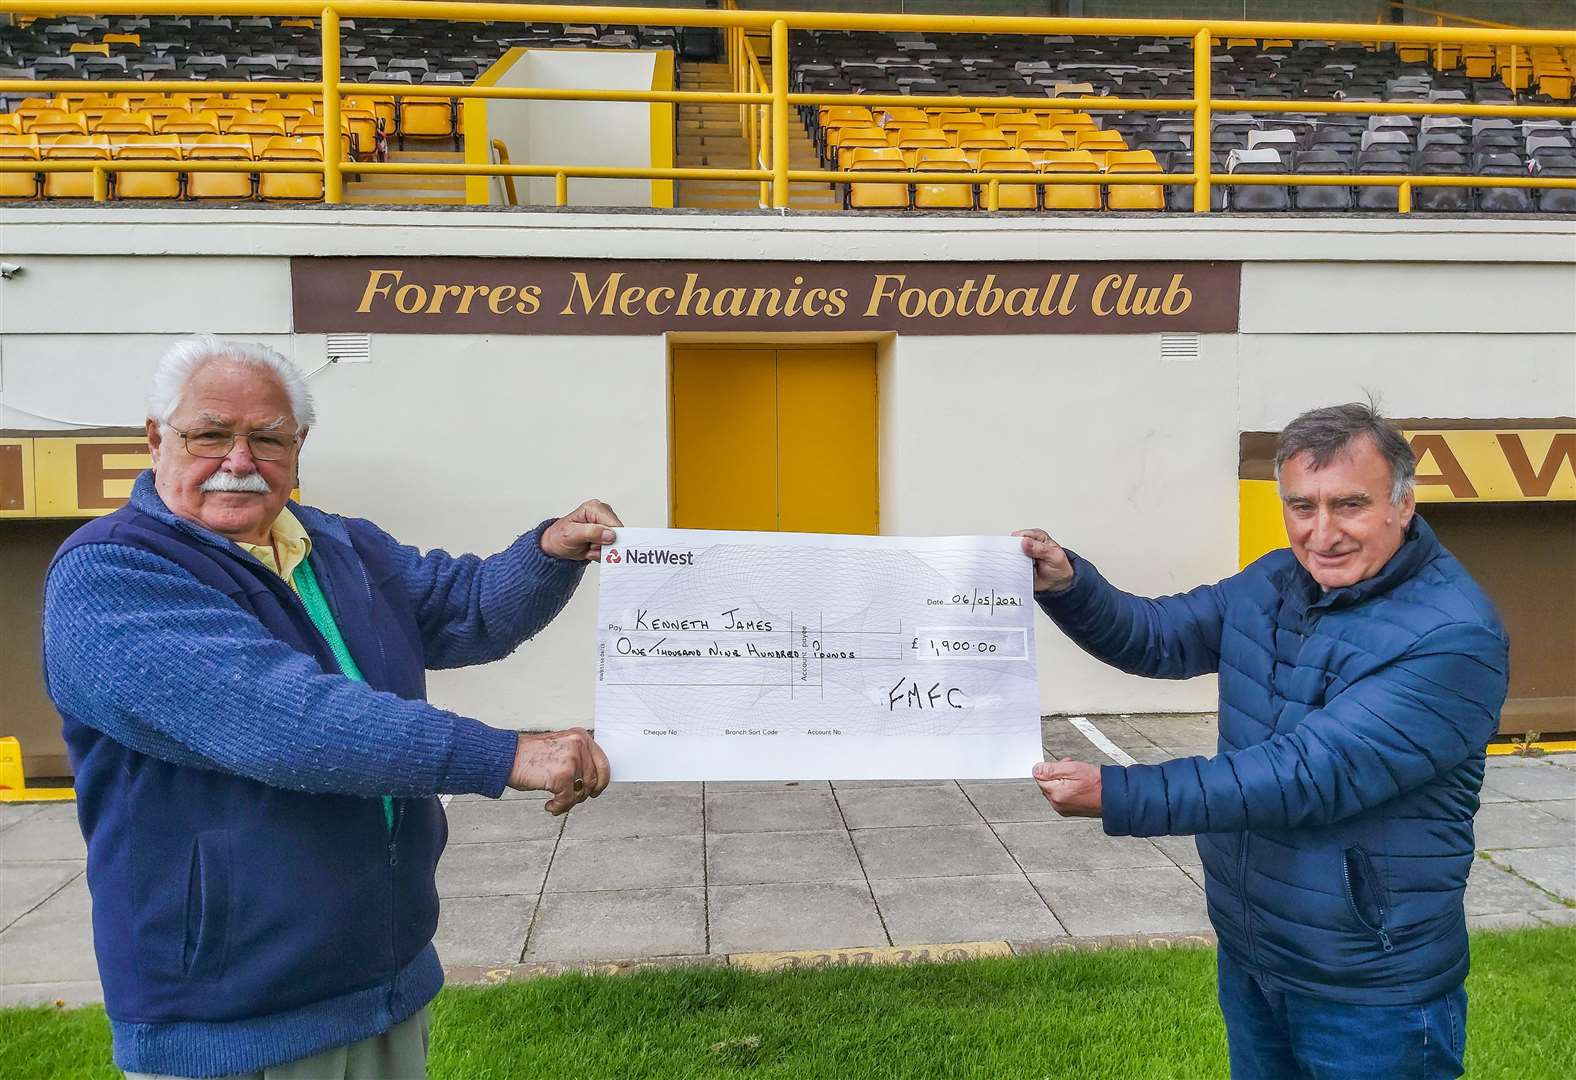 Kenneth James (left) with Cans chairman Dave Macdonald at Mosset Park.